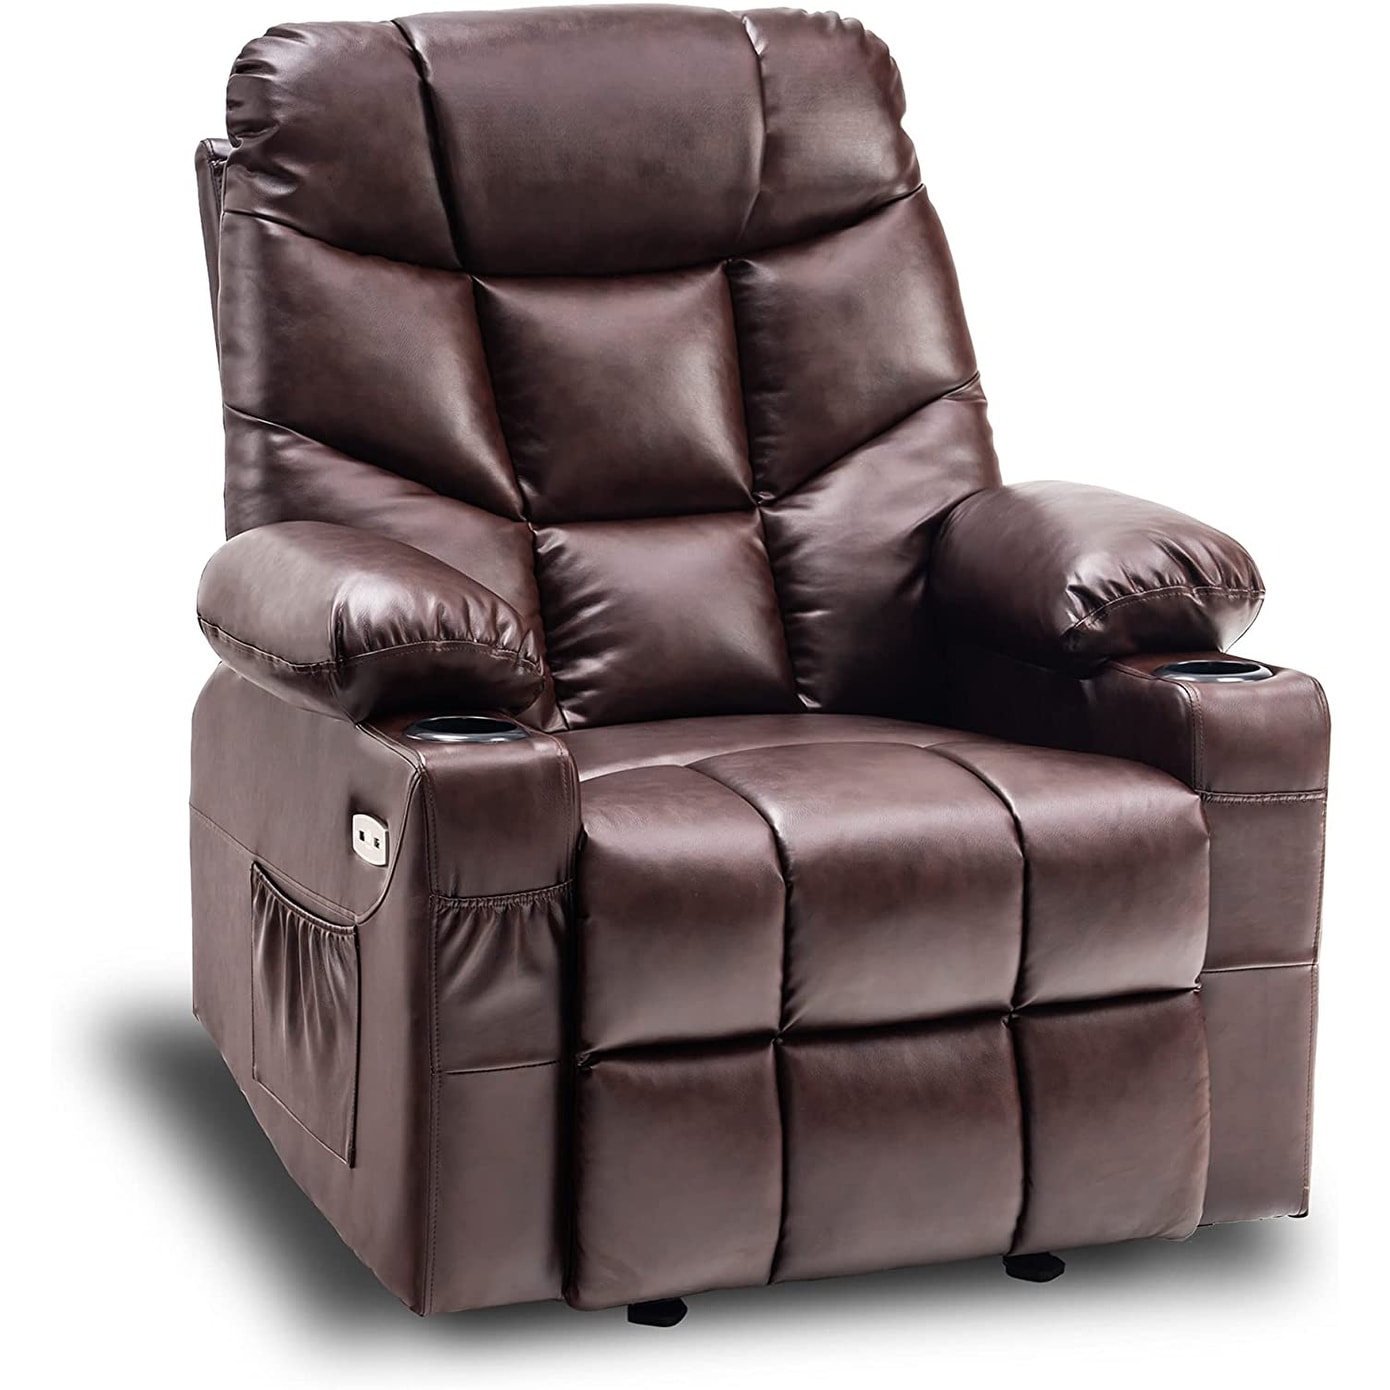 Mcombo Manual Glider Rocker Recliner Chair With Usb Ports  Faux Leather 8002